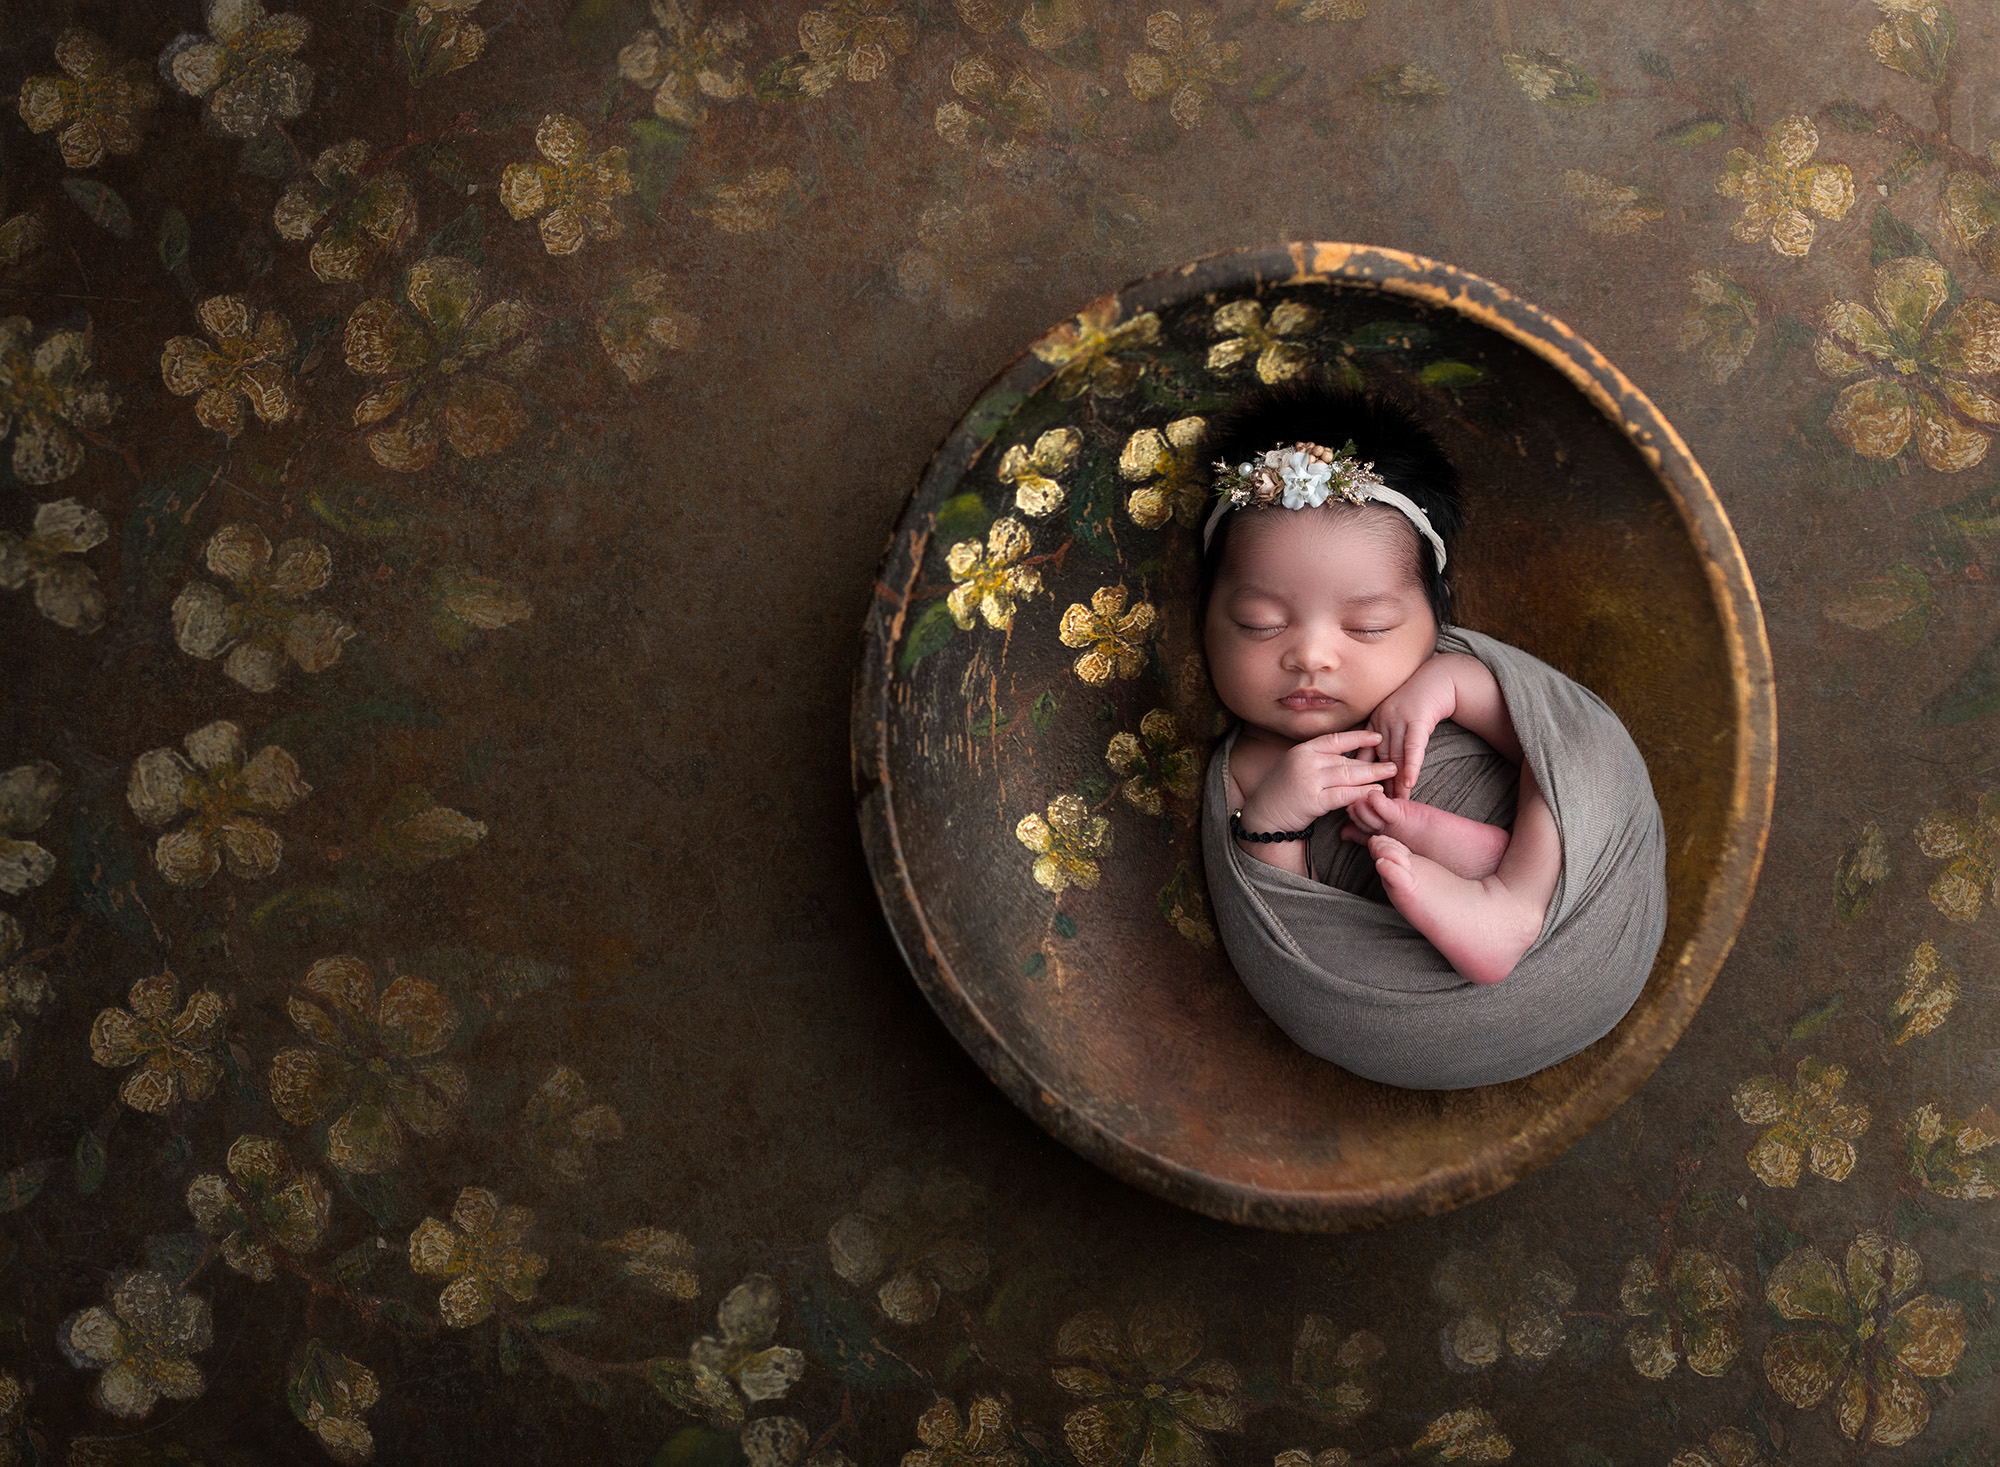 newborn baby girl asleep in rustic bowl surrounded by golden flowers